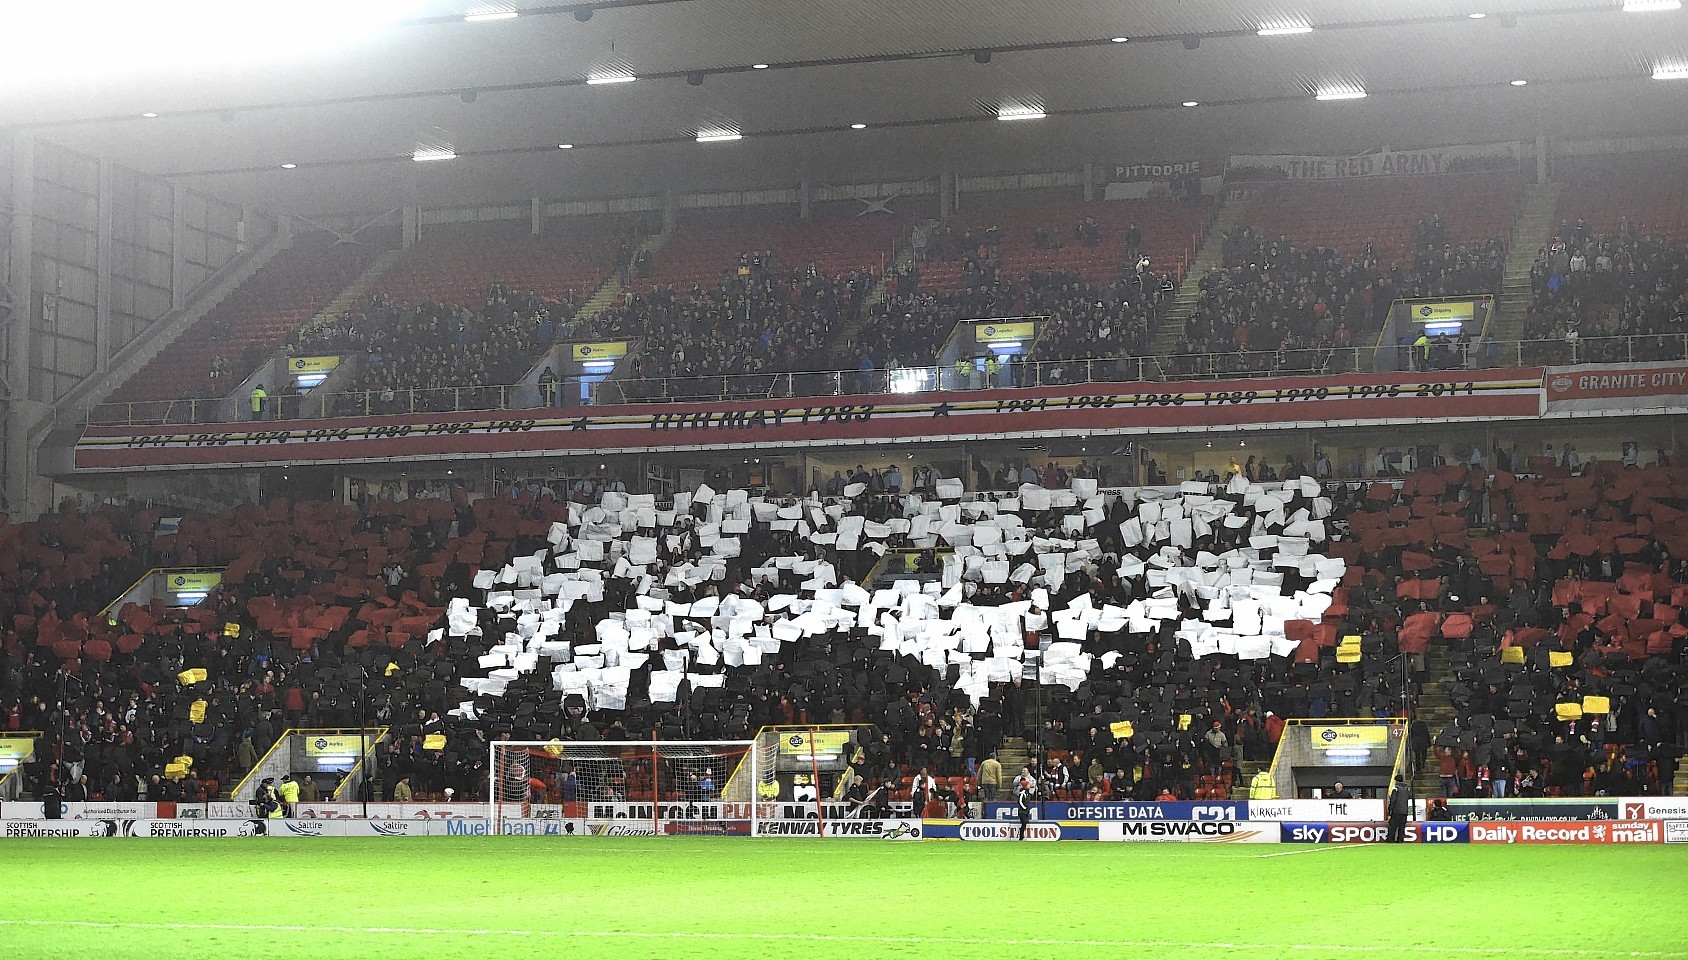 The highlight of the evening so far for Aberdeen has to be the pre match display from the Dons support